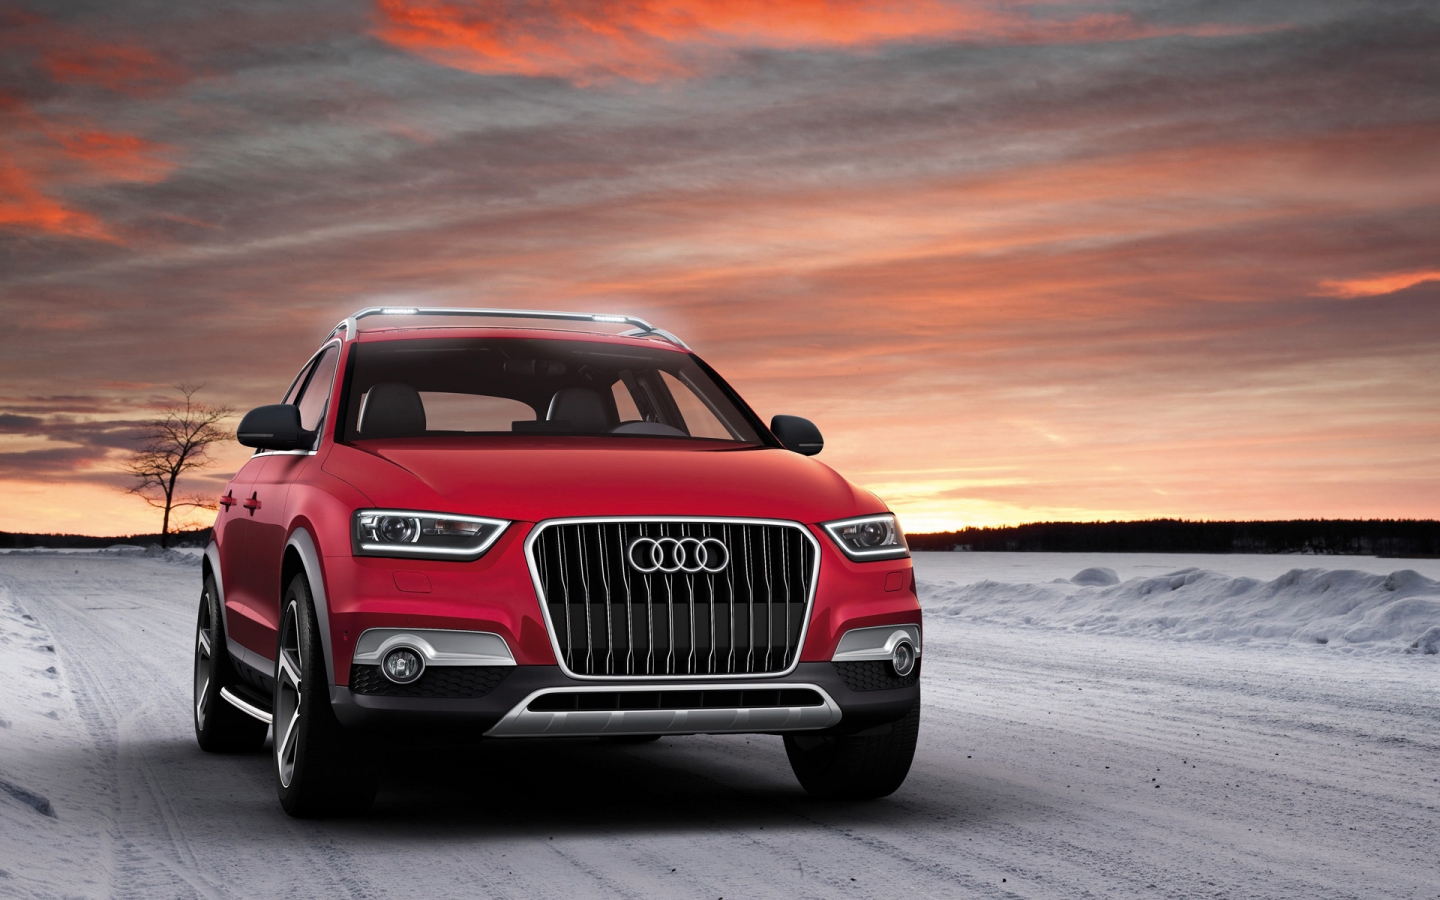 2012 Audi Q3 Vail Front for 1440 x 900 widescreen resolution